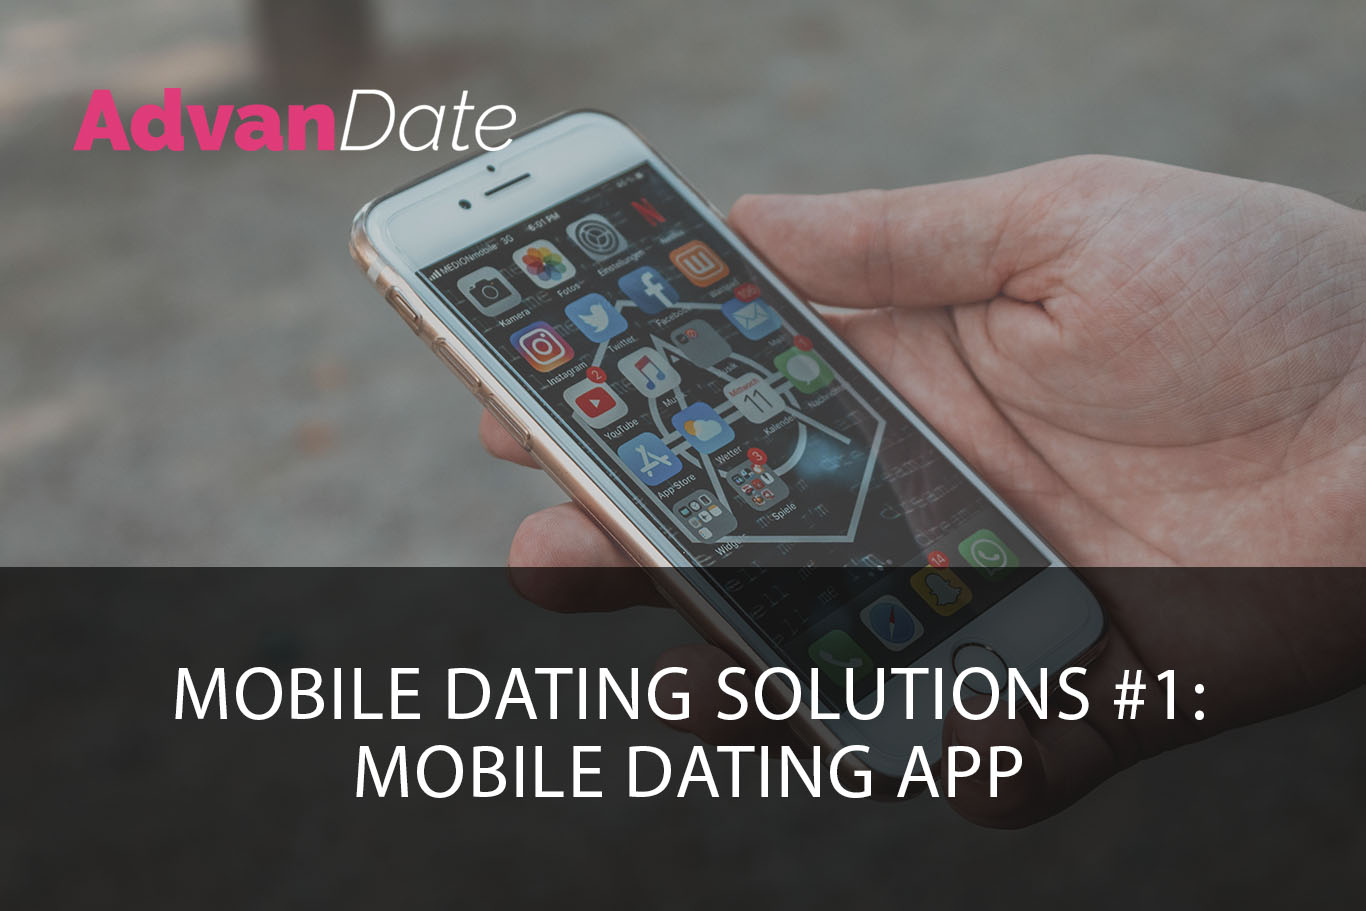 Mobile dating solutions #1: Mobile dating app